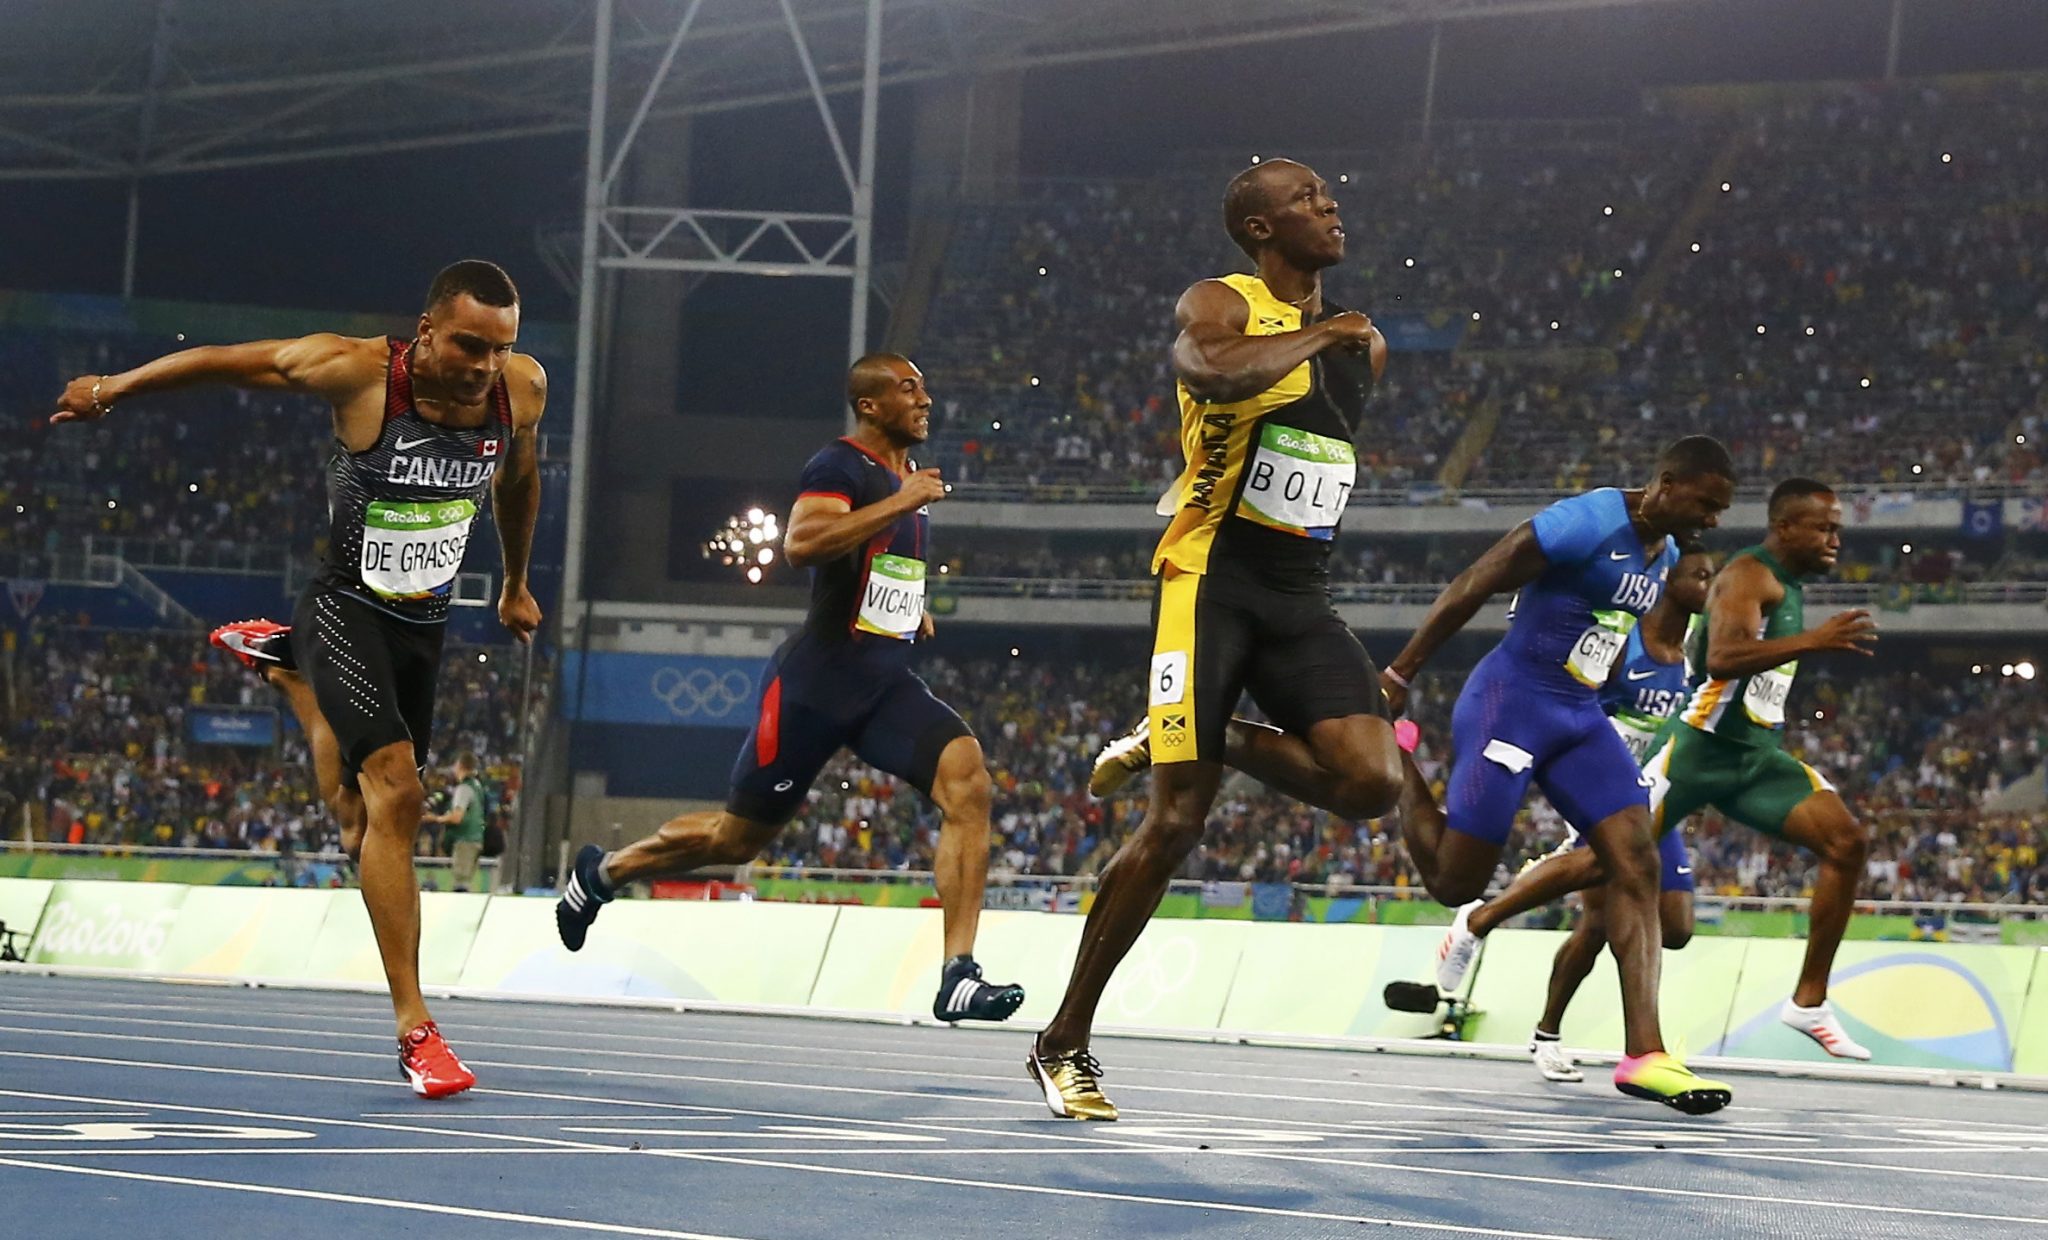 2016 Rio Olympics - Athletics - Final - Men's 100m Final - Olympic Stadium - Rio de Janeiro, Brazil - 14/08/2016. Usain Bolt (JAM) of Jamaica runs to win the gold. REUTERS/Kai Pfaffenbach TPX IMAGES OF THE DAY. FOR EDITORIAL USE ONLY. NOT FOR SALE FOR MARKETING OR ADVERTISING CAMPAIGNS.